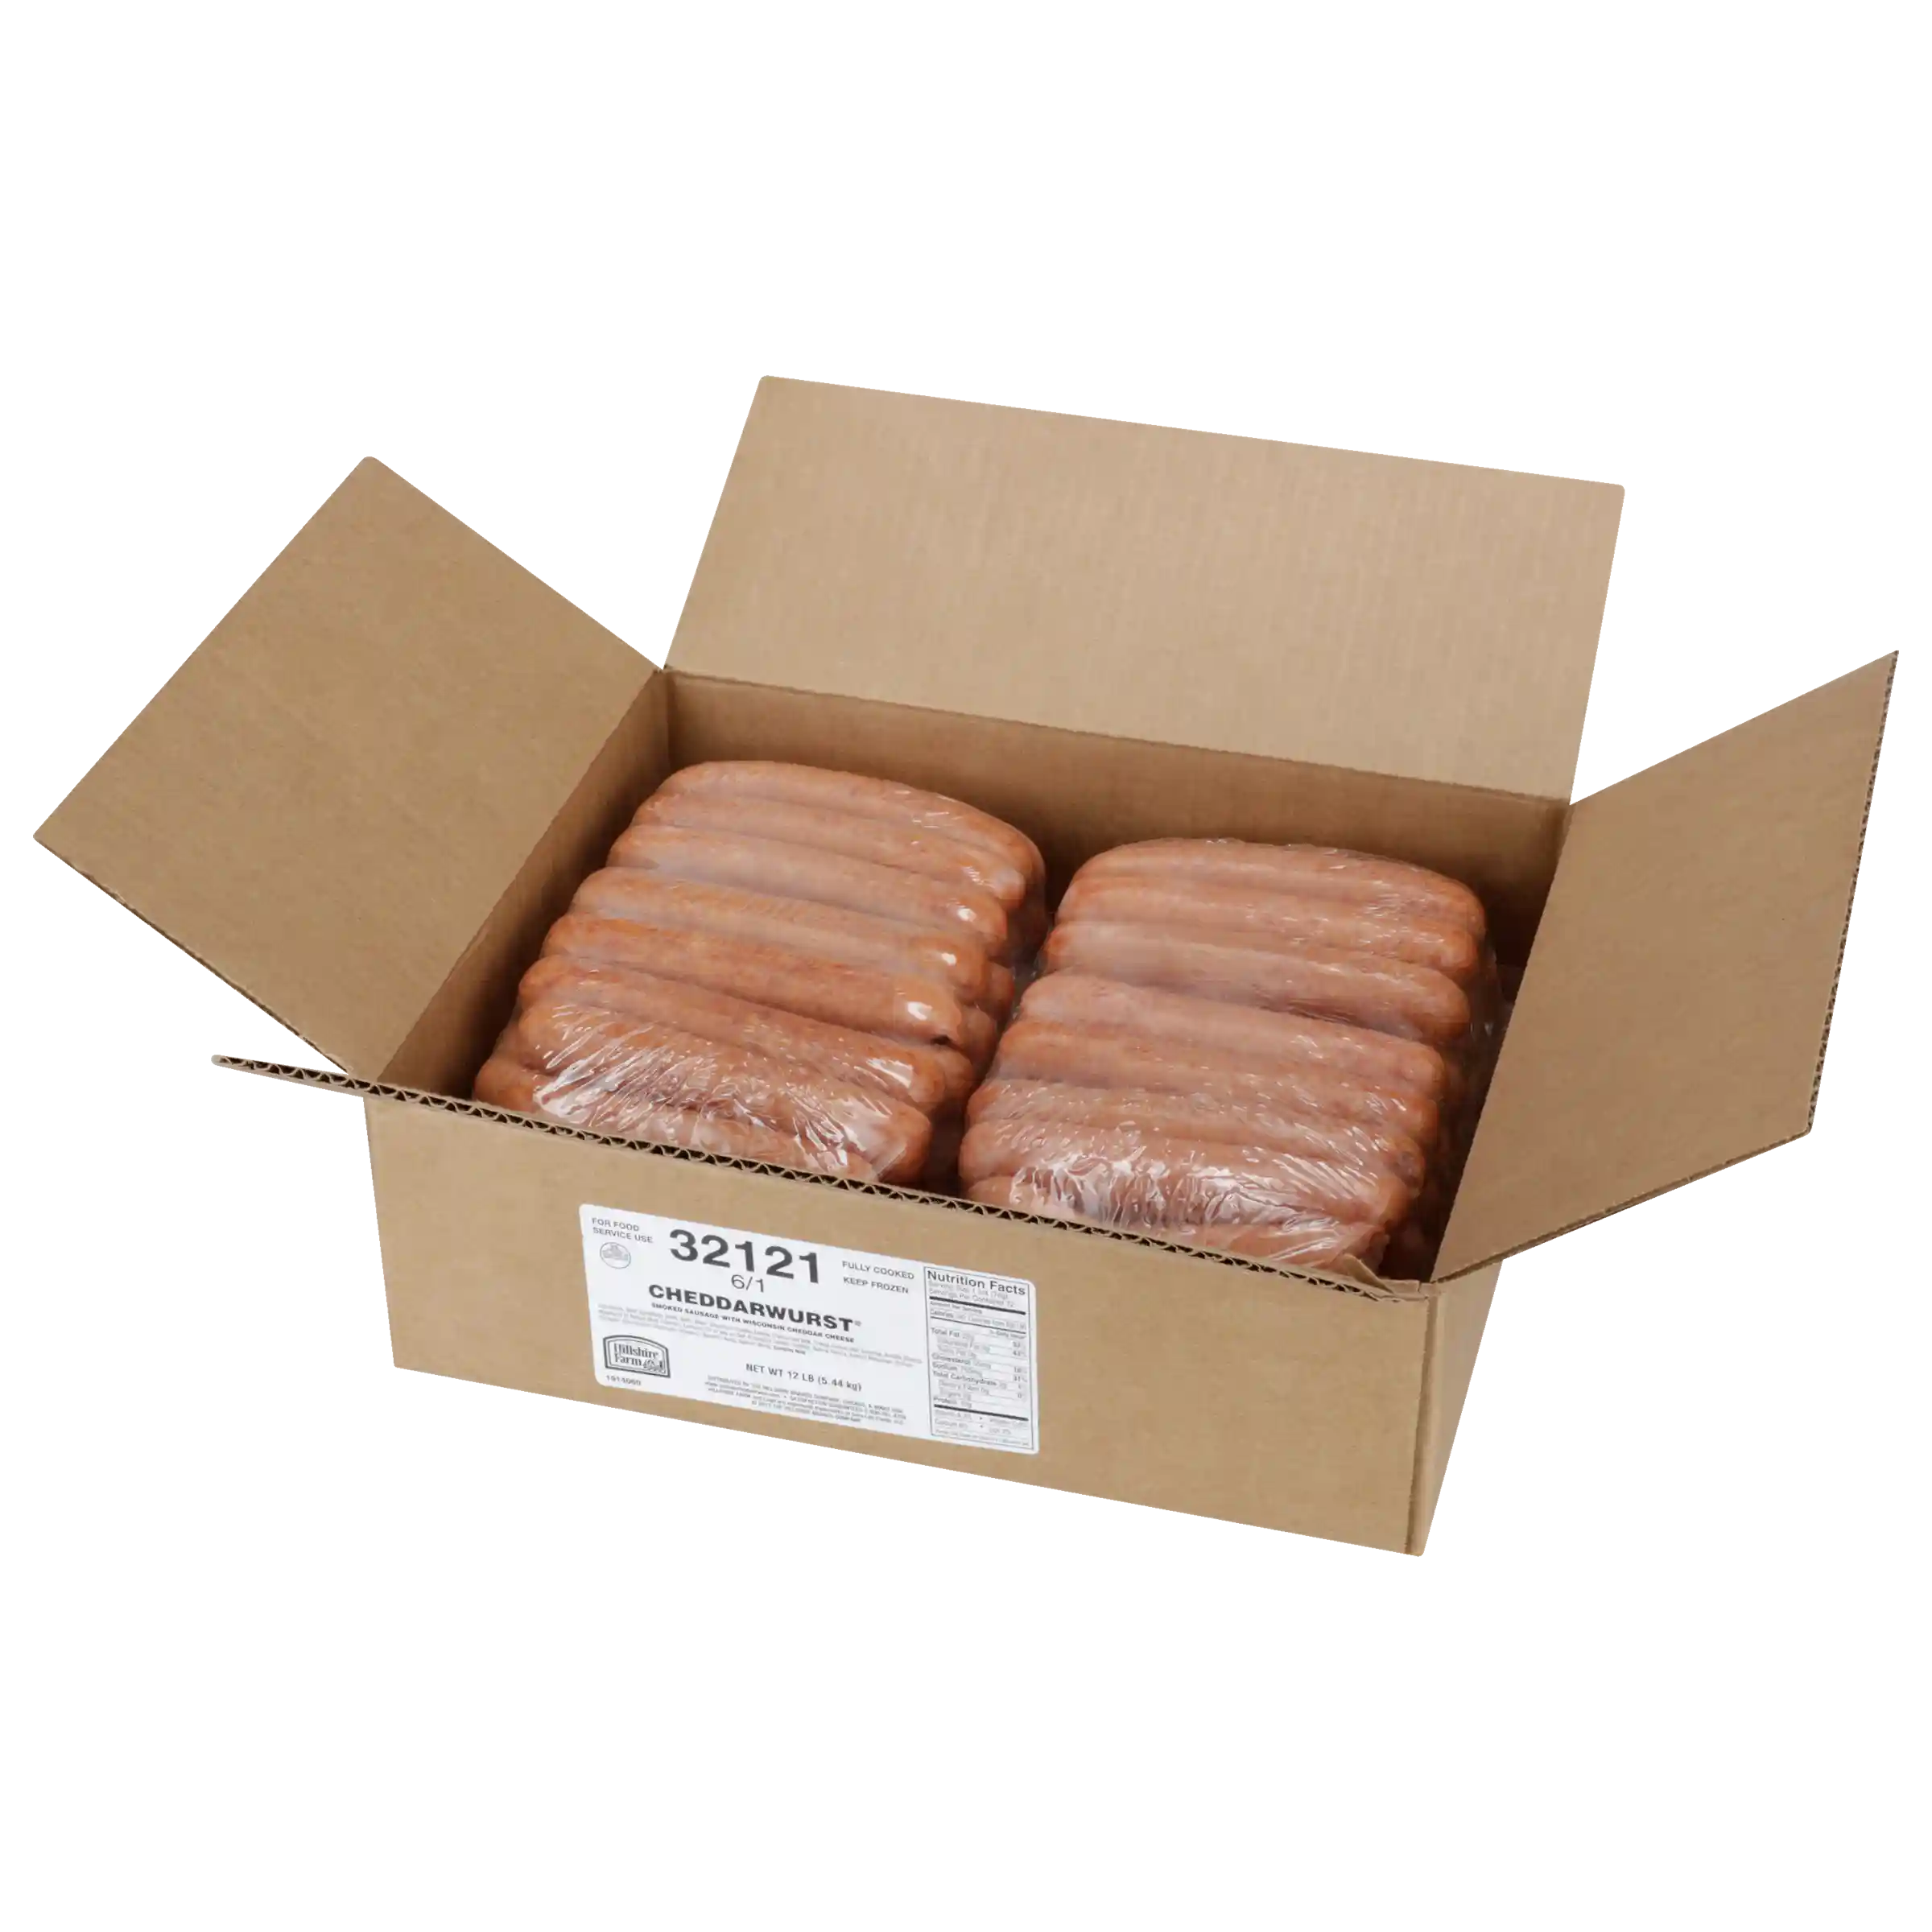 Hillshire Farm® Cheddarwurst® Fully Cooked Polish Skinless Dinner Sausage Links, 6:1 Links Per Lb, 6 Inch, Frozen_image_31